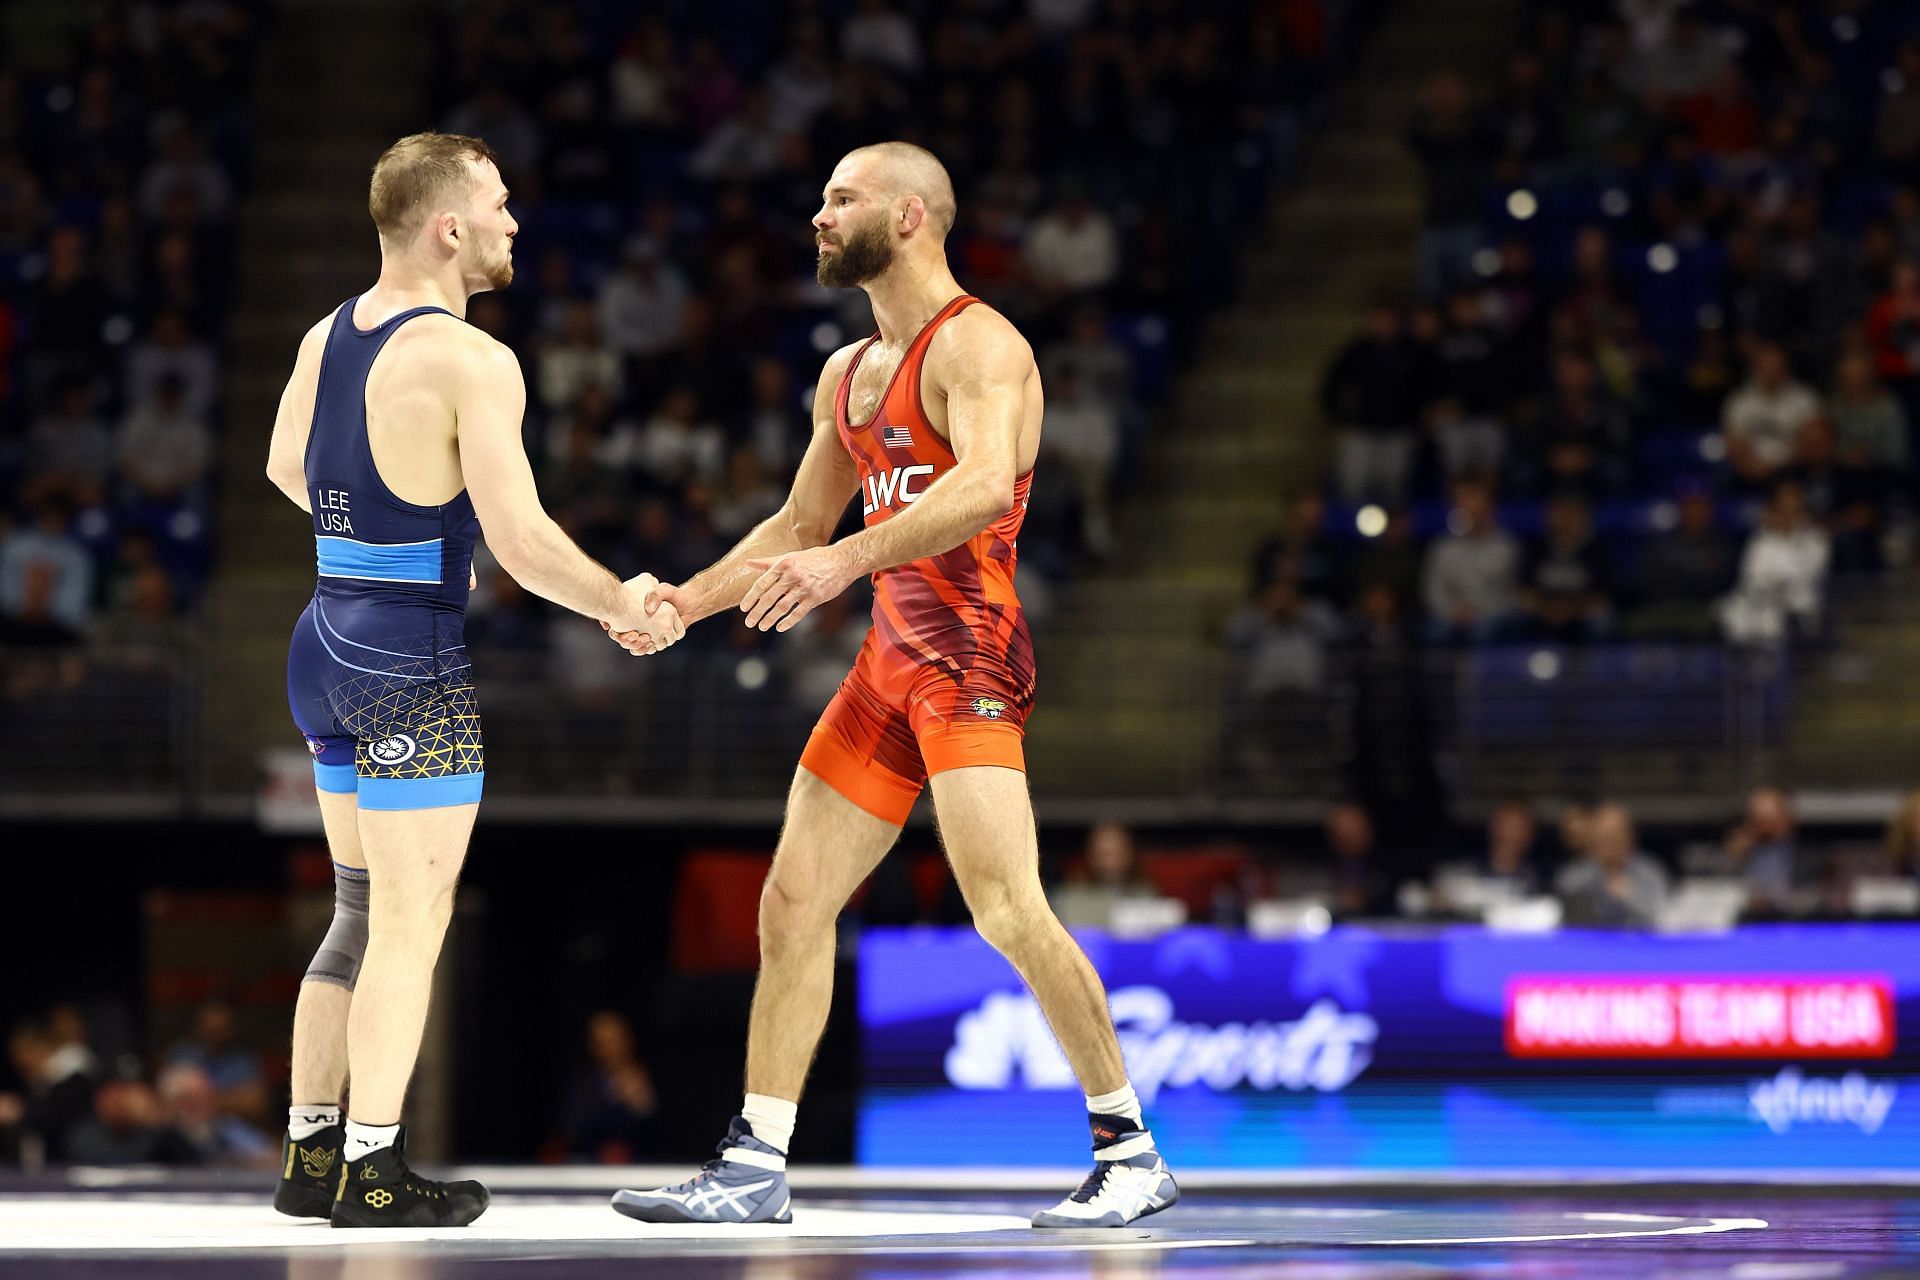 Spencer Lee (Left) and Thomas Gilman (Right) at the 2024 US Olympic Trials